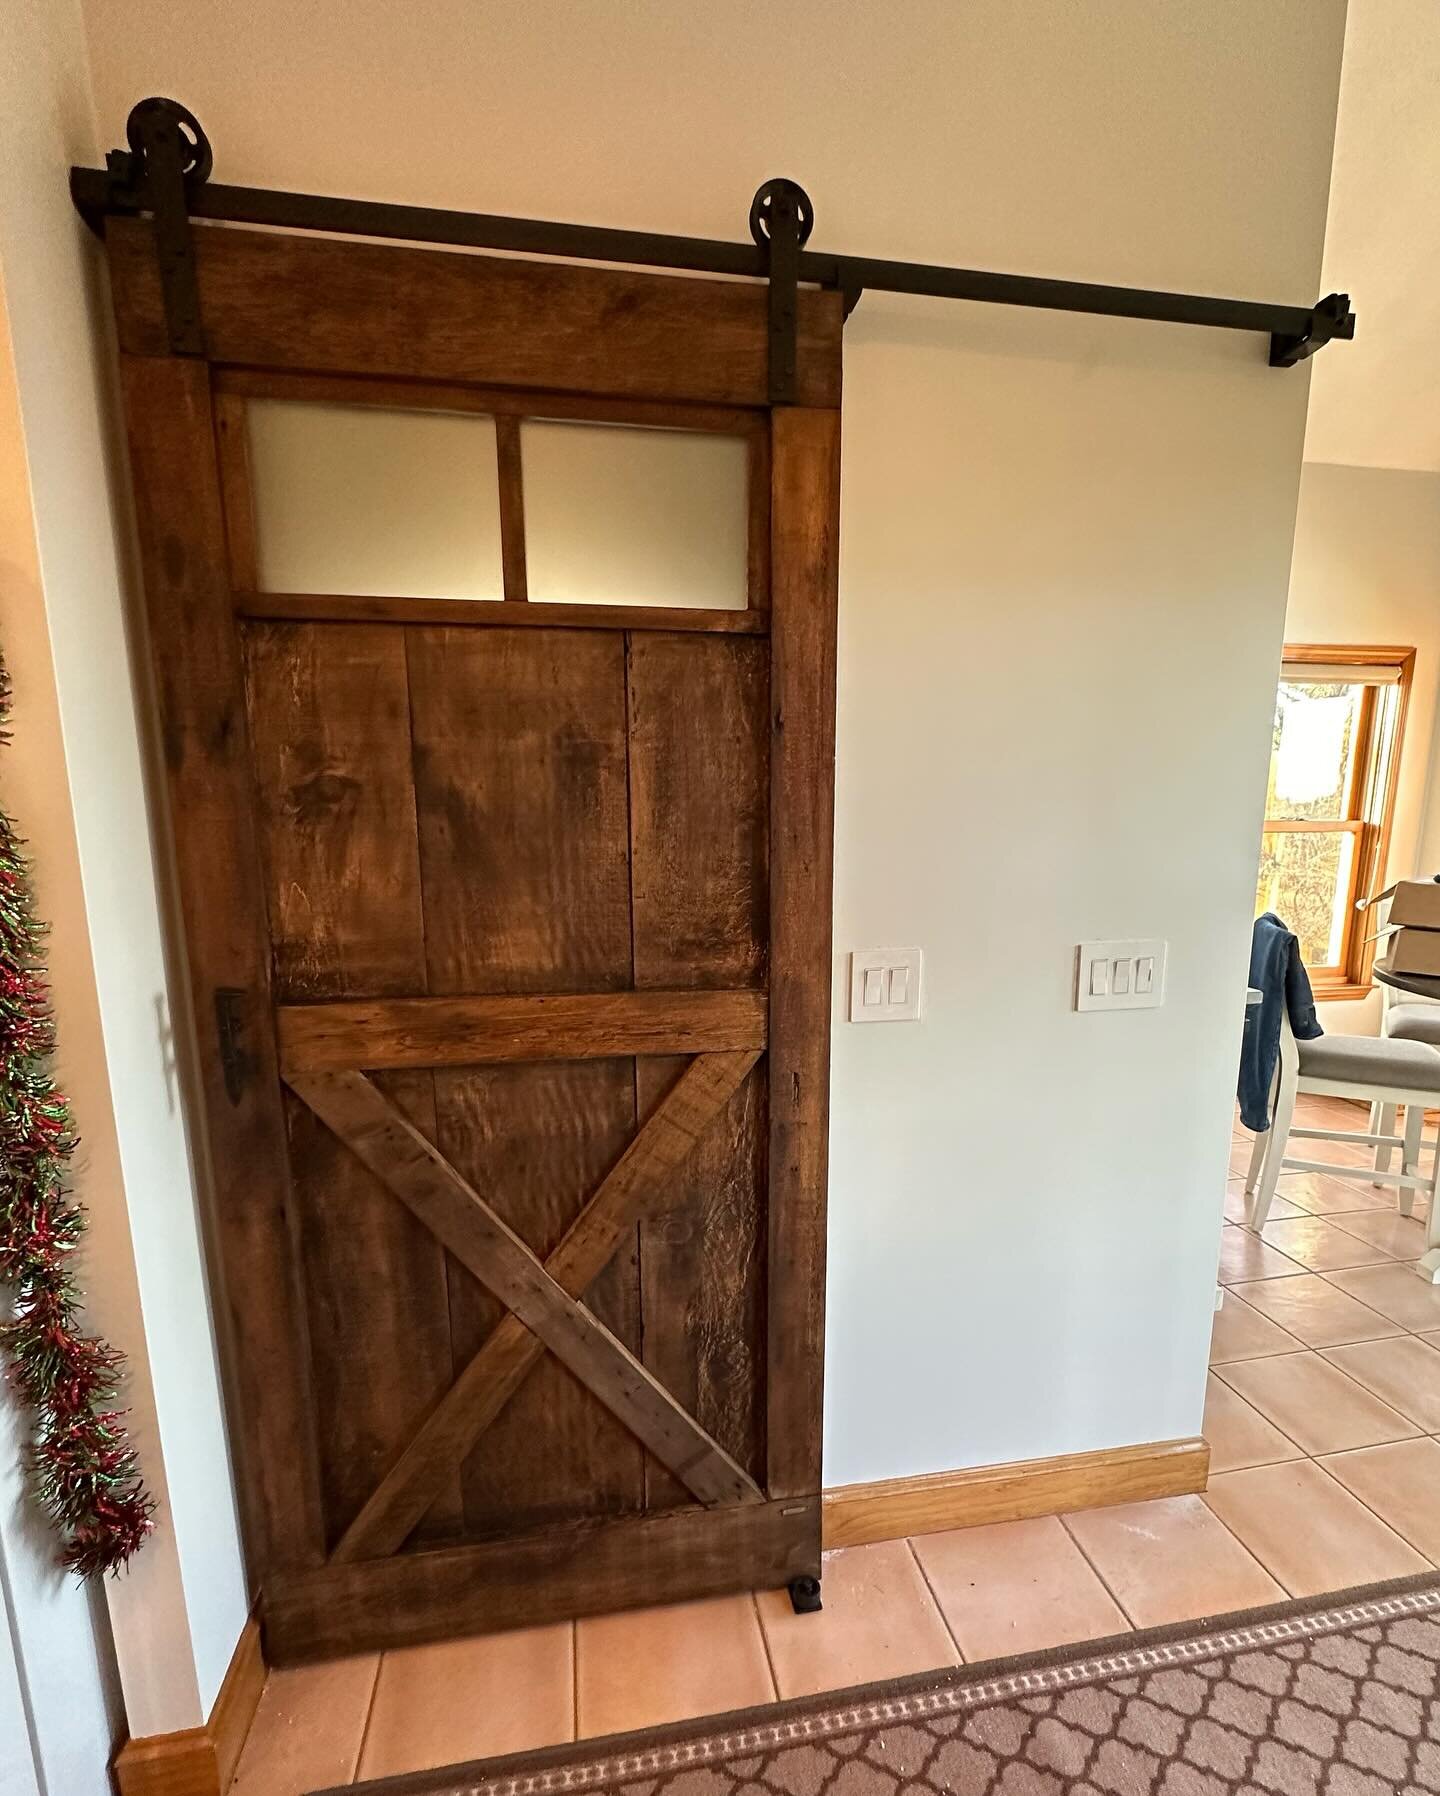 Joe and Florence moved to Littleton,MA in the summer and the finishing touches on their spacious home are our classic rustic barn doors! 

The laundry room door has top frosted panels we inset that are made from 1/4&rdquo; thick architectural plexigl